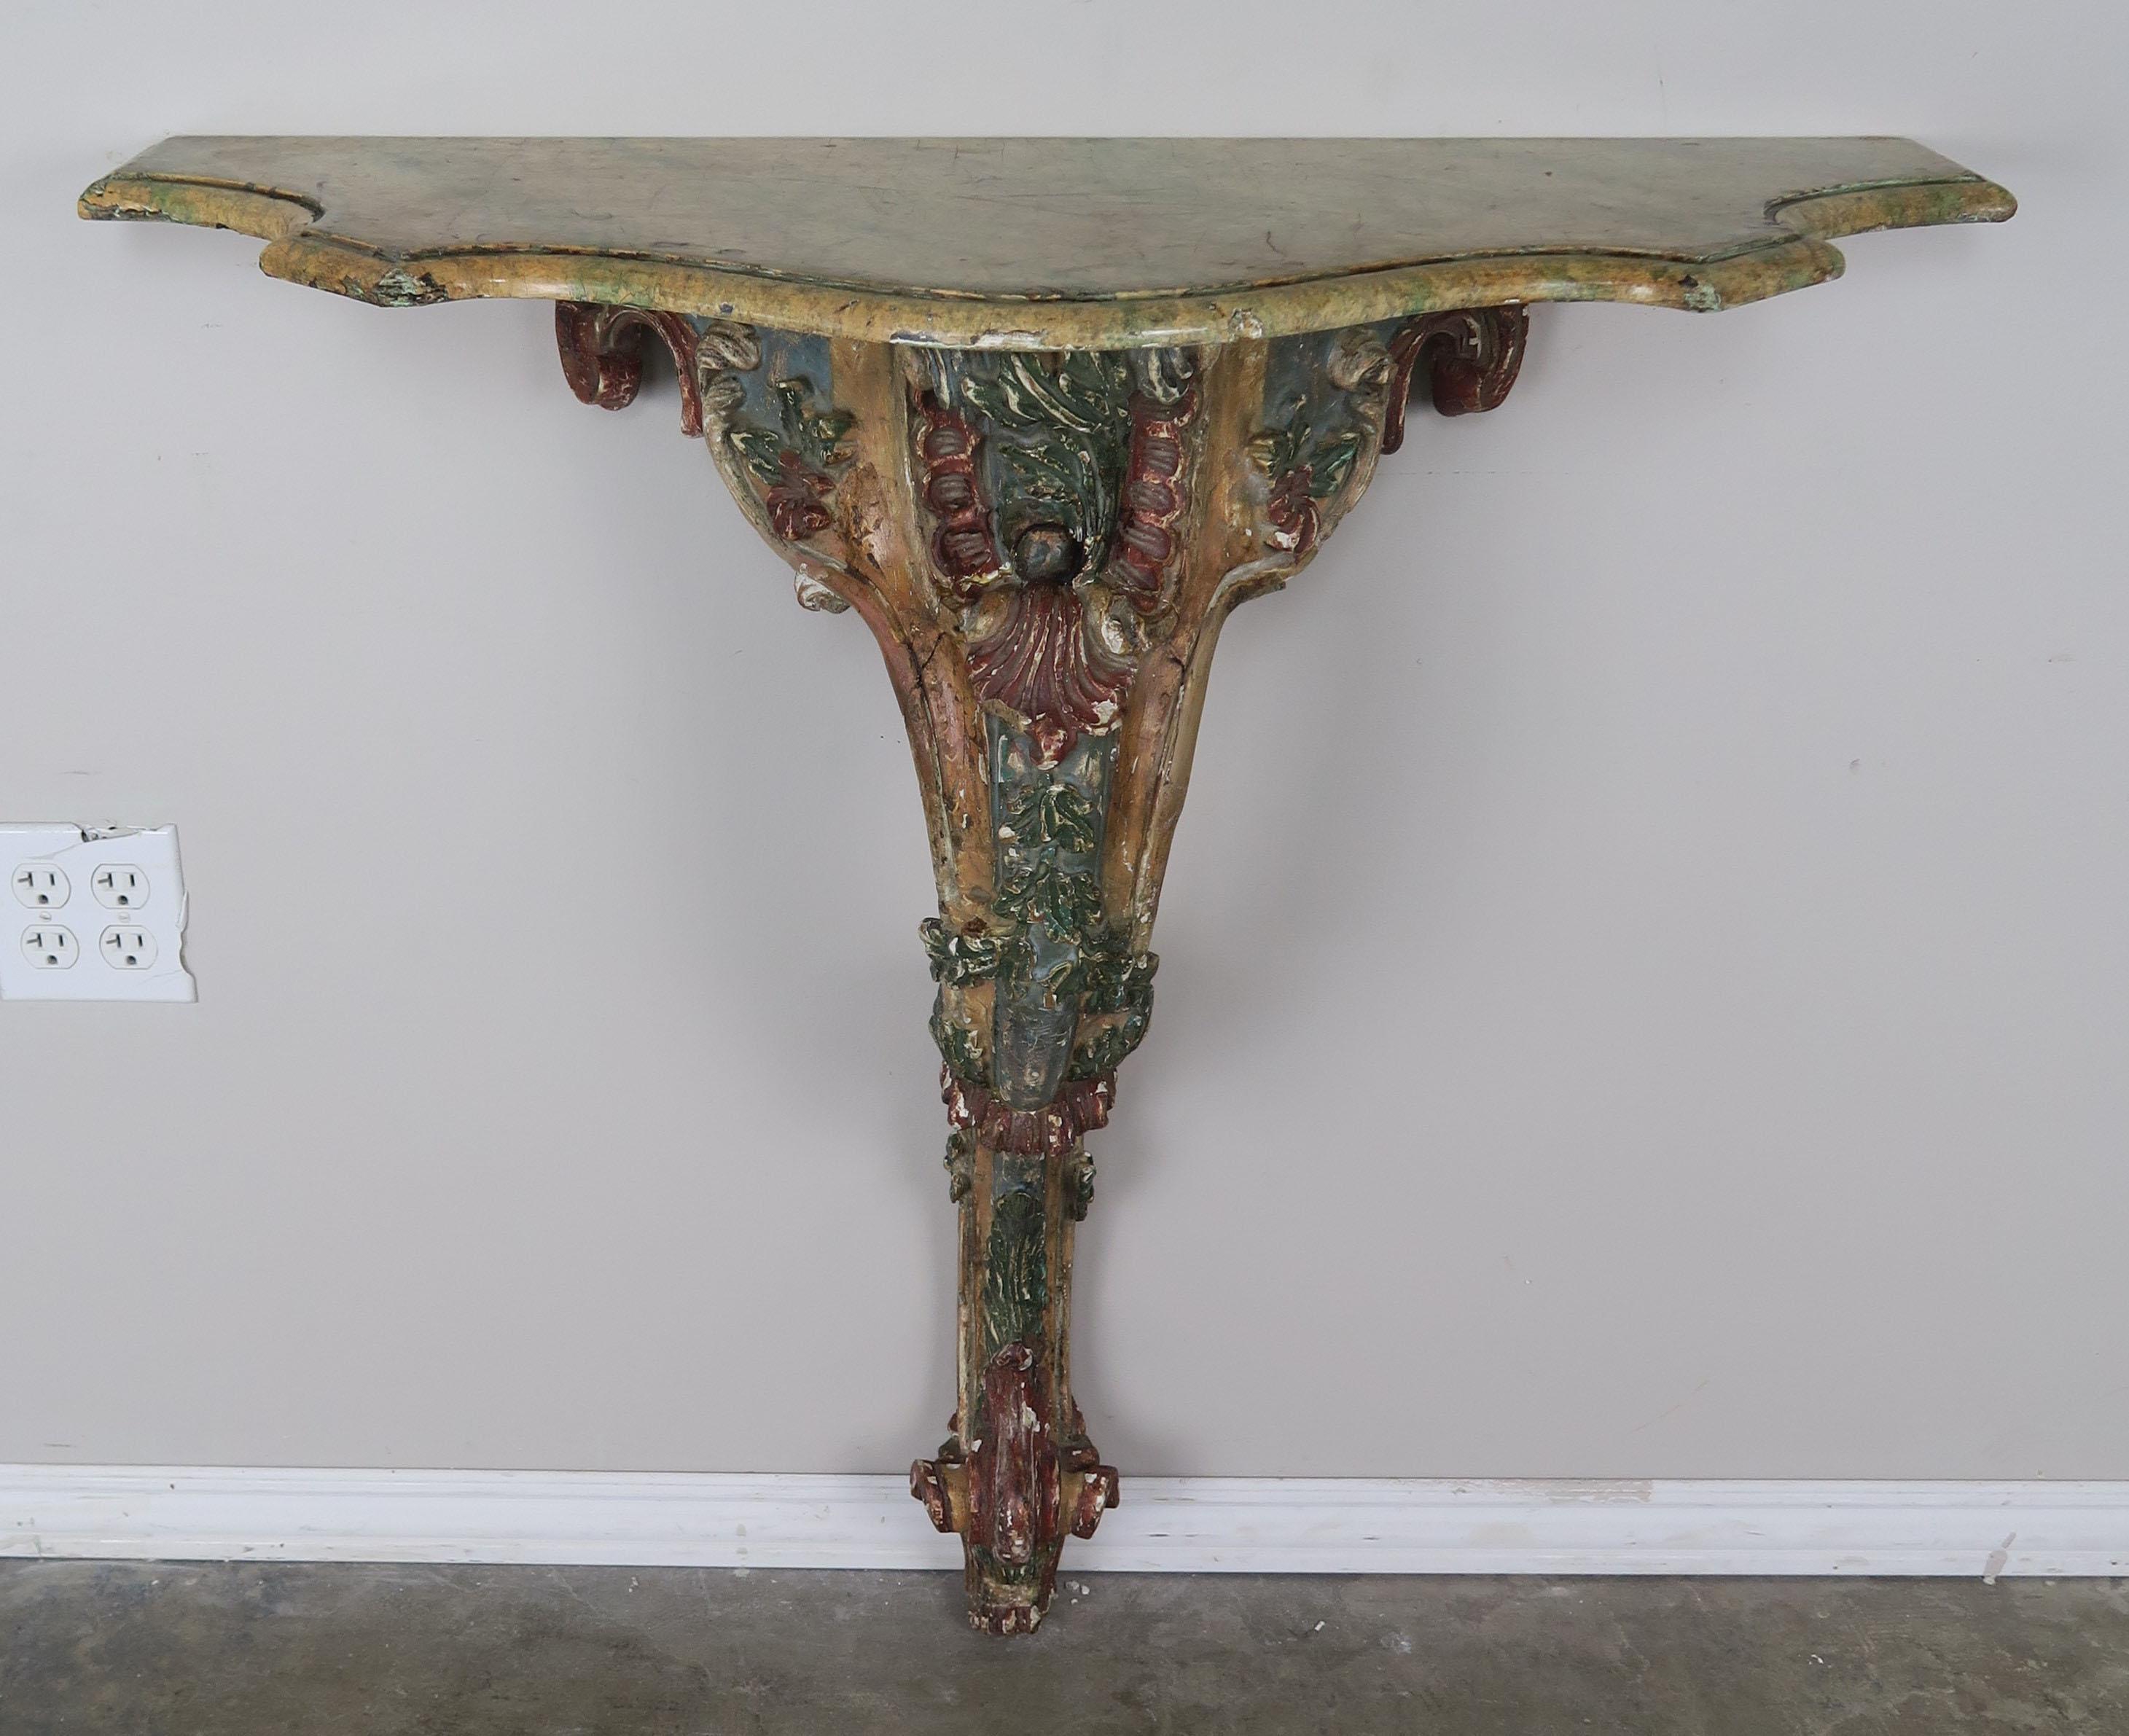 French painted carved console with serpentine shaped top. The console stands on a single cabriole leg that ends in a ram's head foot. The console is painted in distressed shades of green, gold and rust. A serpentine shaped top with a nice edge